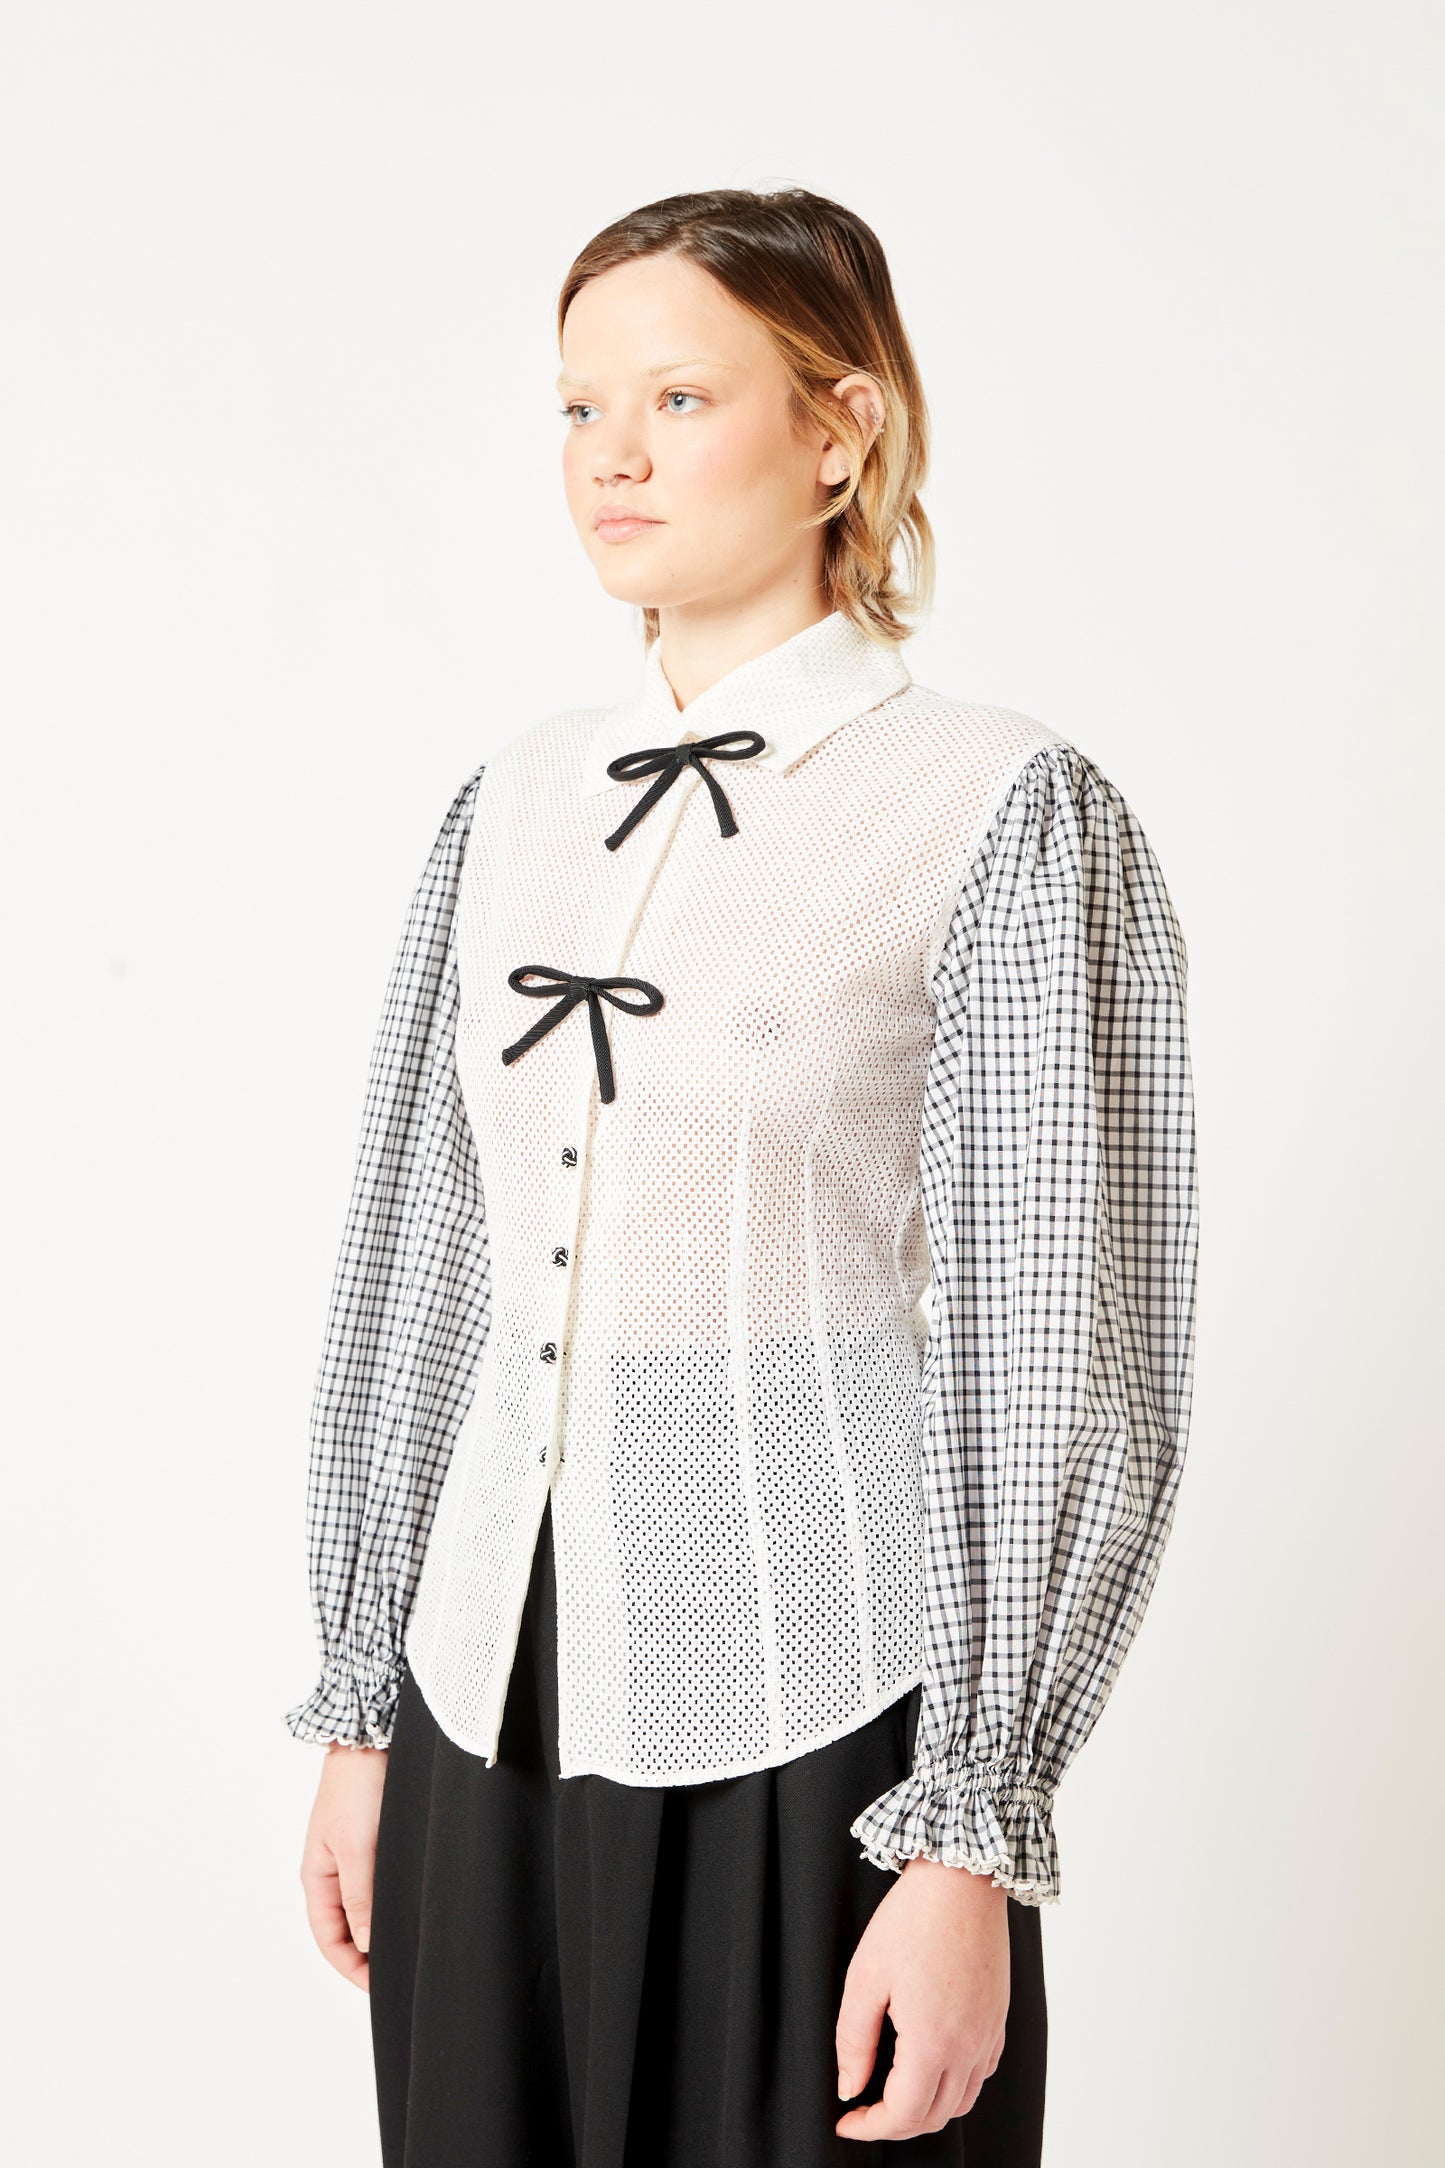 Christian Dior Broderie Anglaise Top